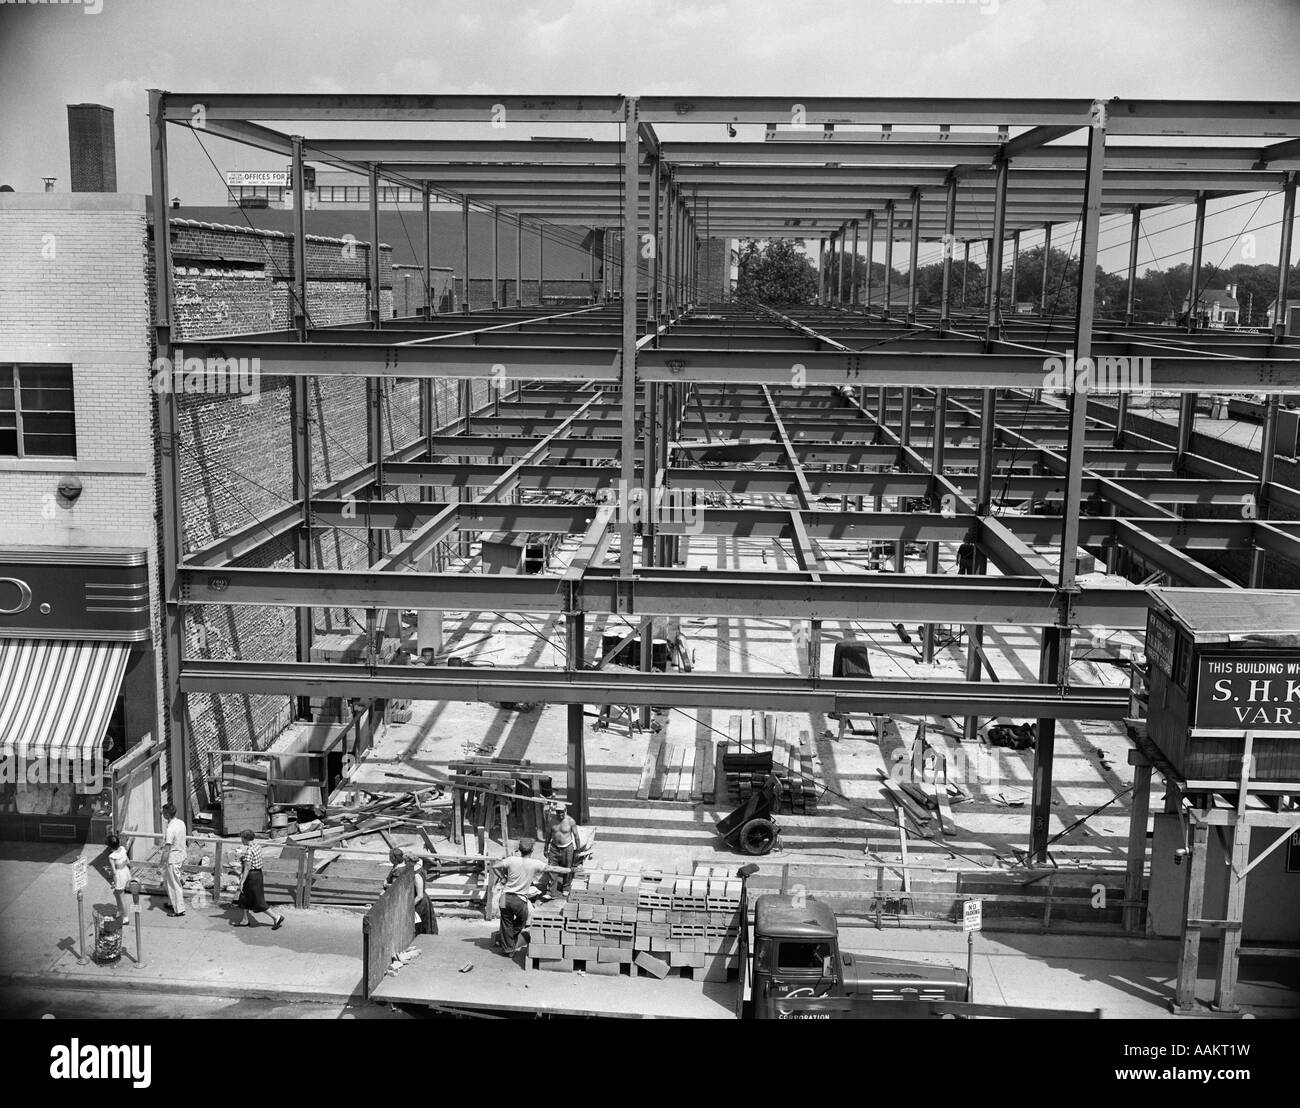 1950s-commercial-site-of-building-construction-with-steel-girder-frame-AAKT1W.jpg